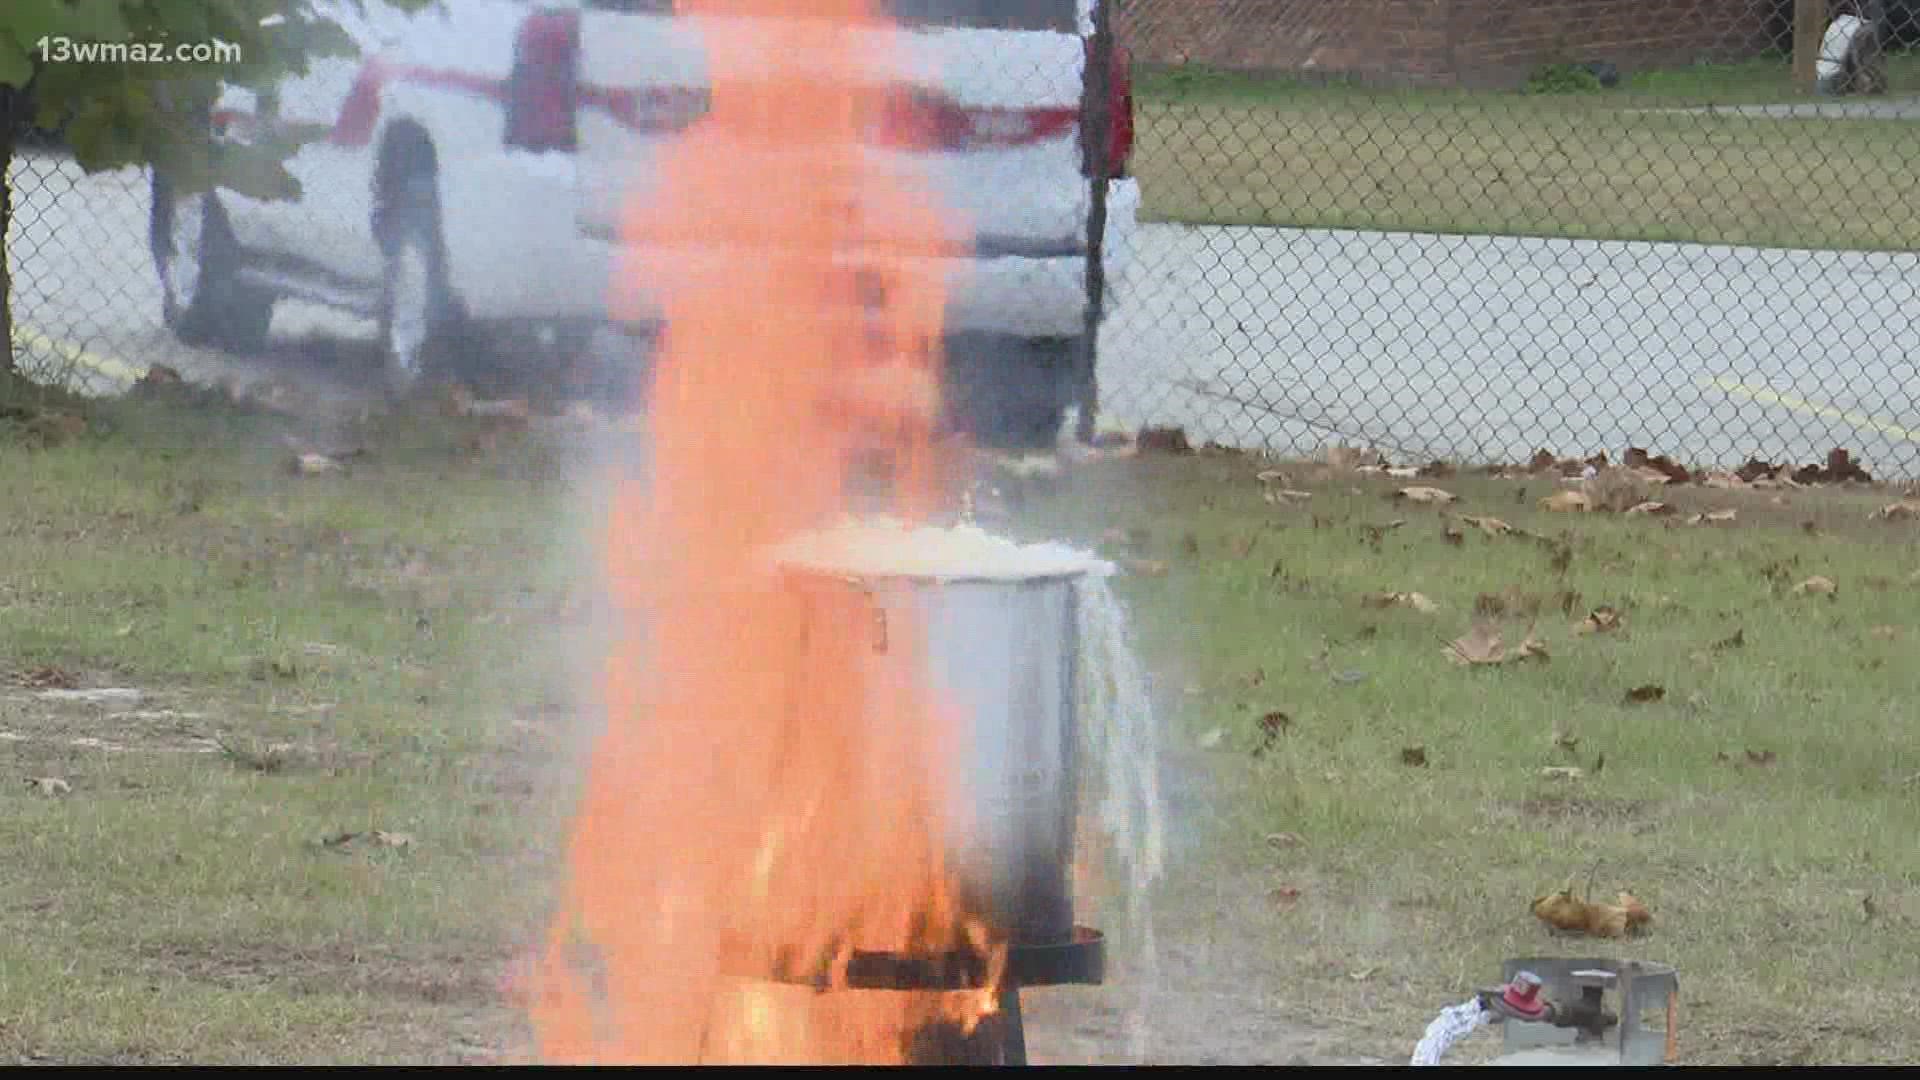 Jeremy Webb says the biggest dangers are frying turkey that isn't fully unthawed and overfilling your grease pan.